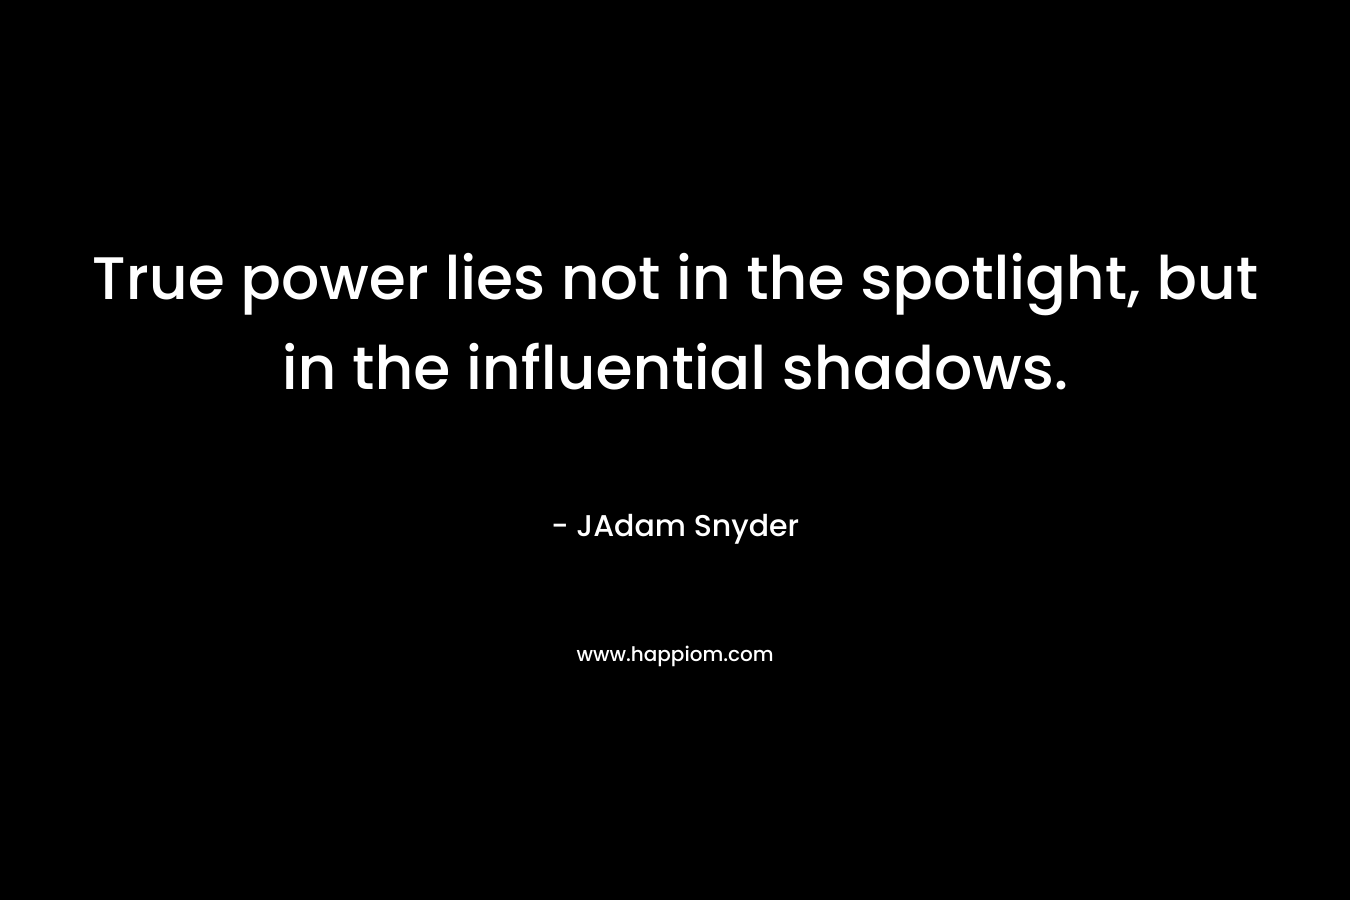 True power lies not in the spotlight, but in the influential shadows.